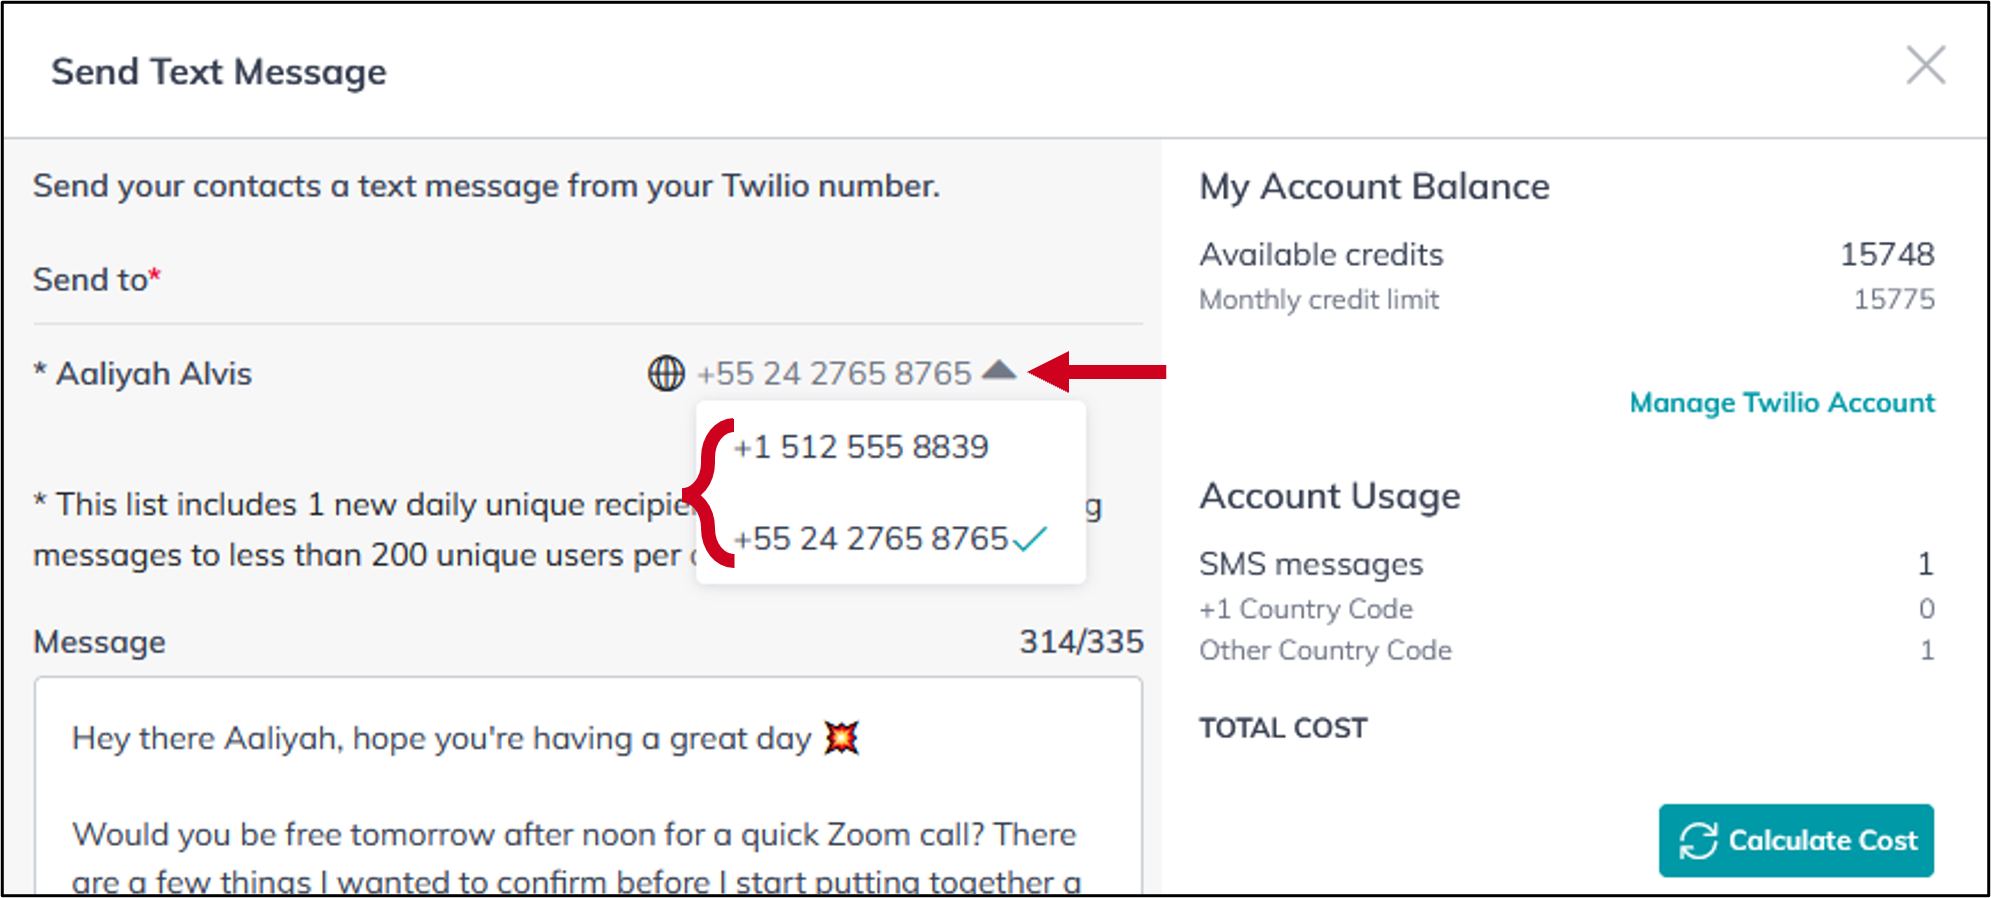 contacts_twilio_choose_between_multiple_numbers.png